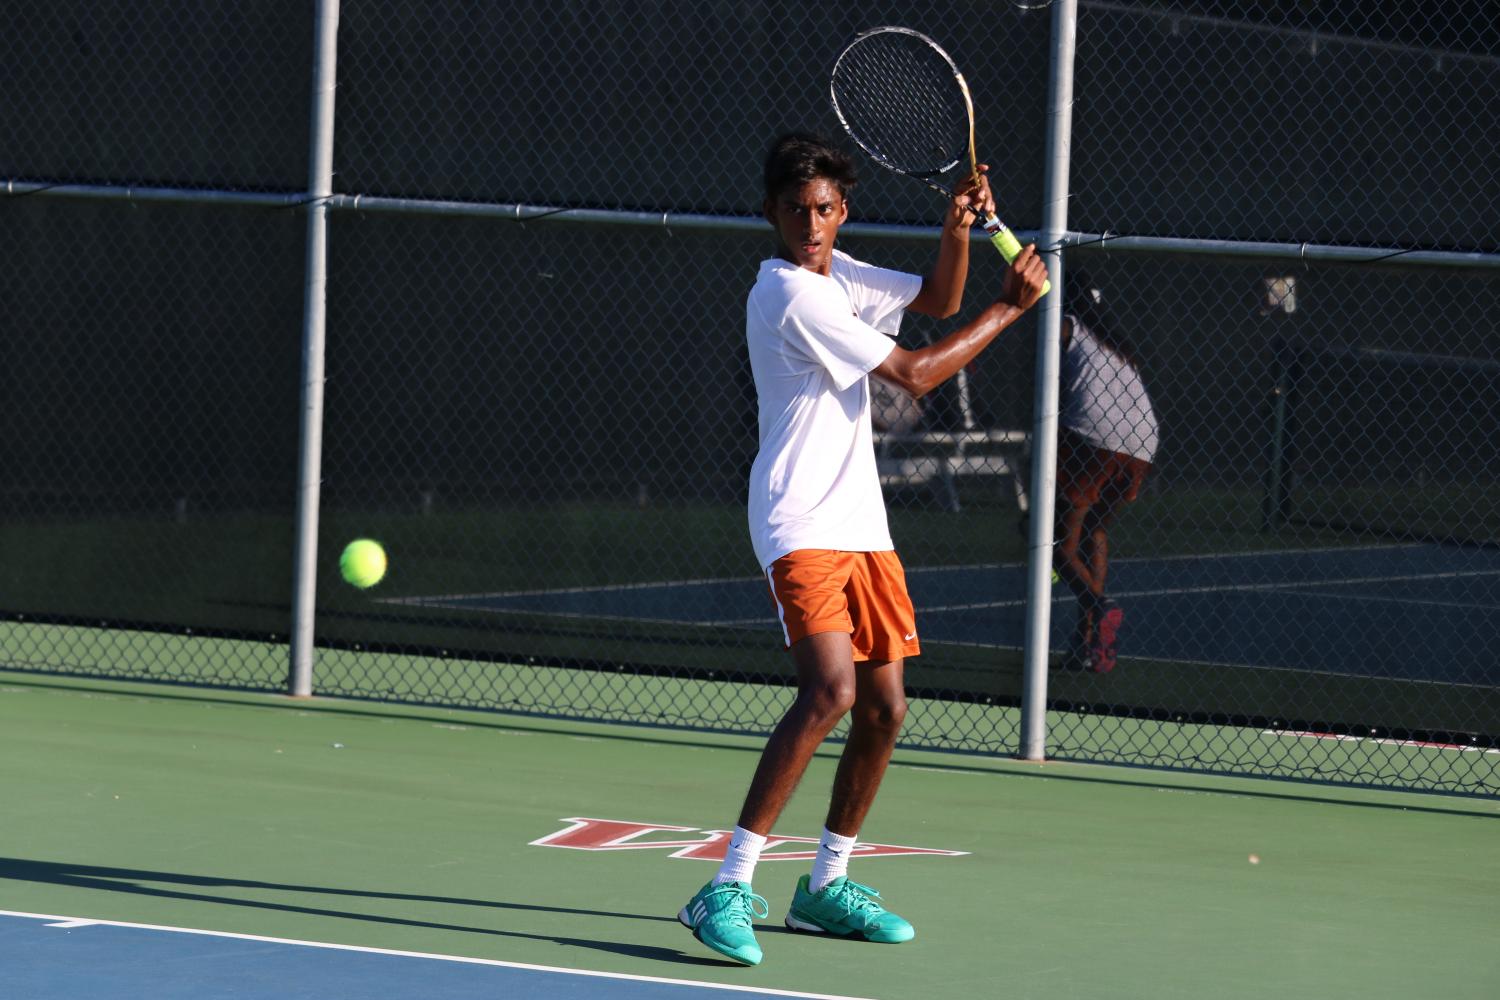 Varsity+Tennis+Brings+Home+District+Championship+Title